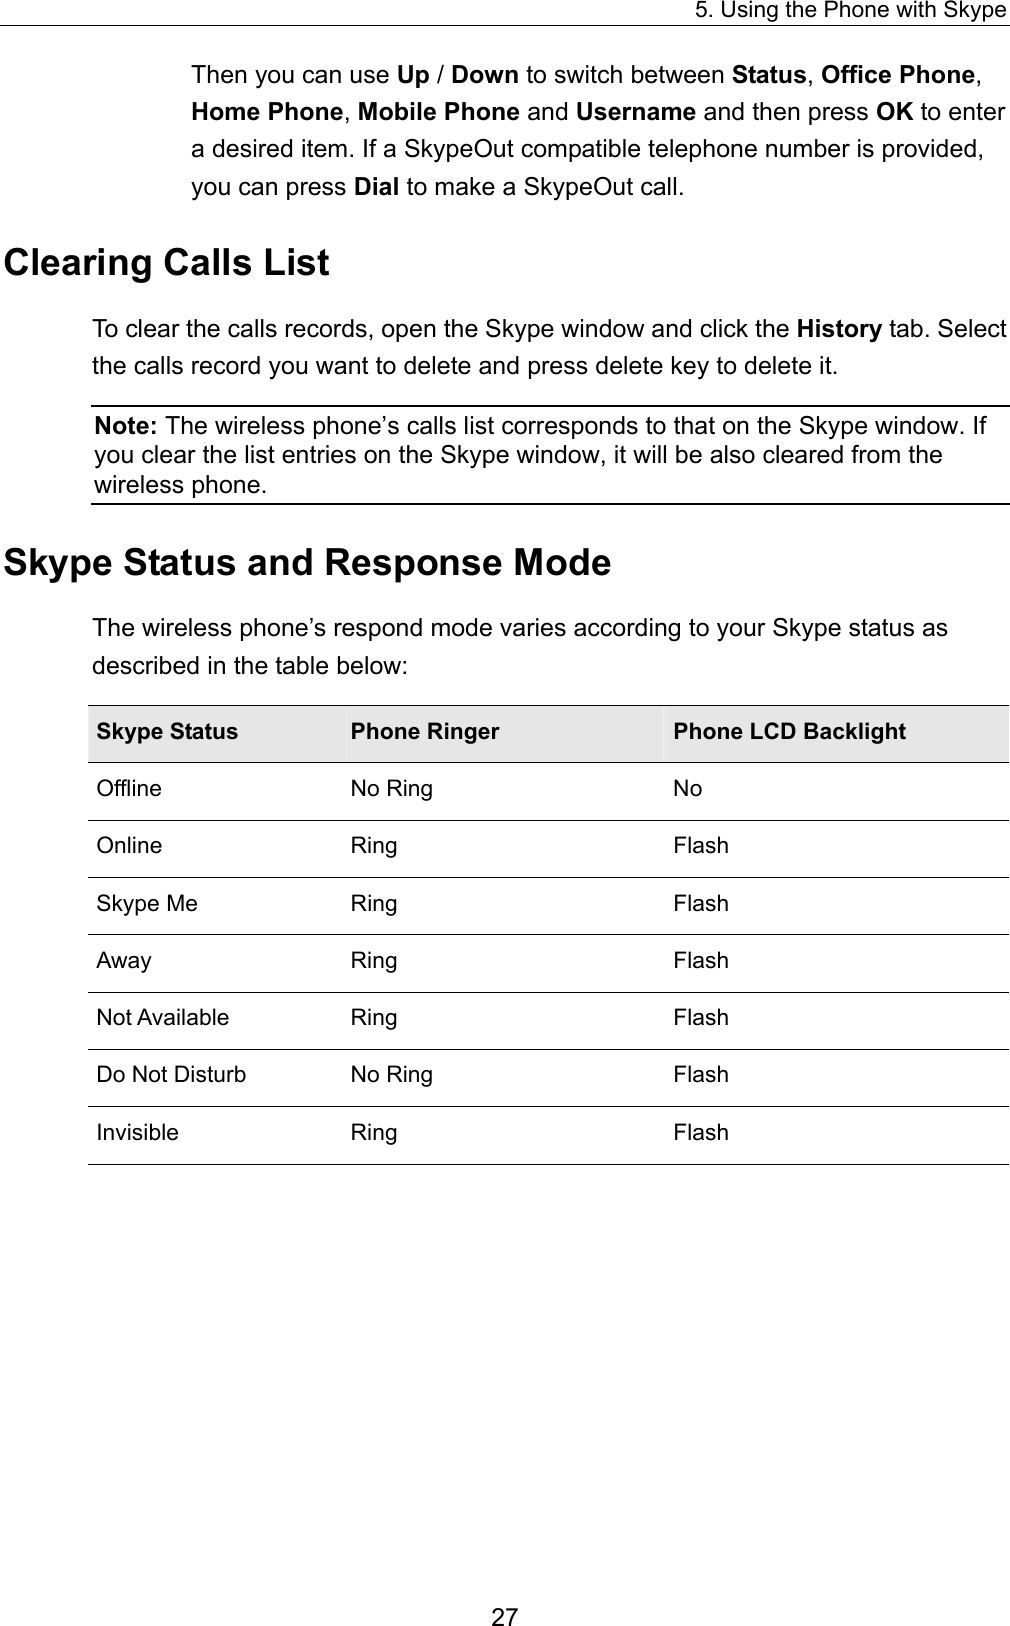 5. Using the Phone with Skype Then you can use Up / Down to switch between Status, Office Phone, Home Phone, Mobile Phone and Username and then press OK to enter a desired item. If a SkypeOut compatible telephone number is provided, you can press Dial to make a SkypeOut call. Clearing Calls List To clear the calls records, open the Skype window and click the History tab. Select the calls record you want to delete and press delete key to delete it. Note: The wireless phone’s calls list corresponds to that on the Skype window. If you clear the list entries on the Skype window, it will be also cleared from the wireless phone.   Skype Status and Response Mode The wireless phone’s respond mode varies according to your Skype status as described in the table below: Skype Status  Phone Ringer  Phone LCD Backlight Offline No Ring  No Online Ring  Flash Skype Me  Ring  Flash Away Ring  Flash Not Available  Ring  Flash Do Not Disturb  No Ring  Flash Invisible Ring  Flash  27 